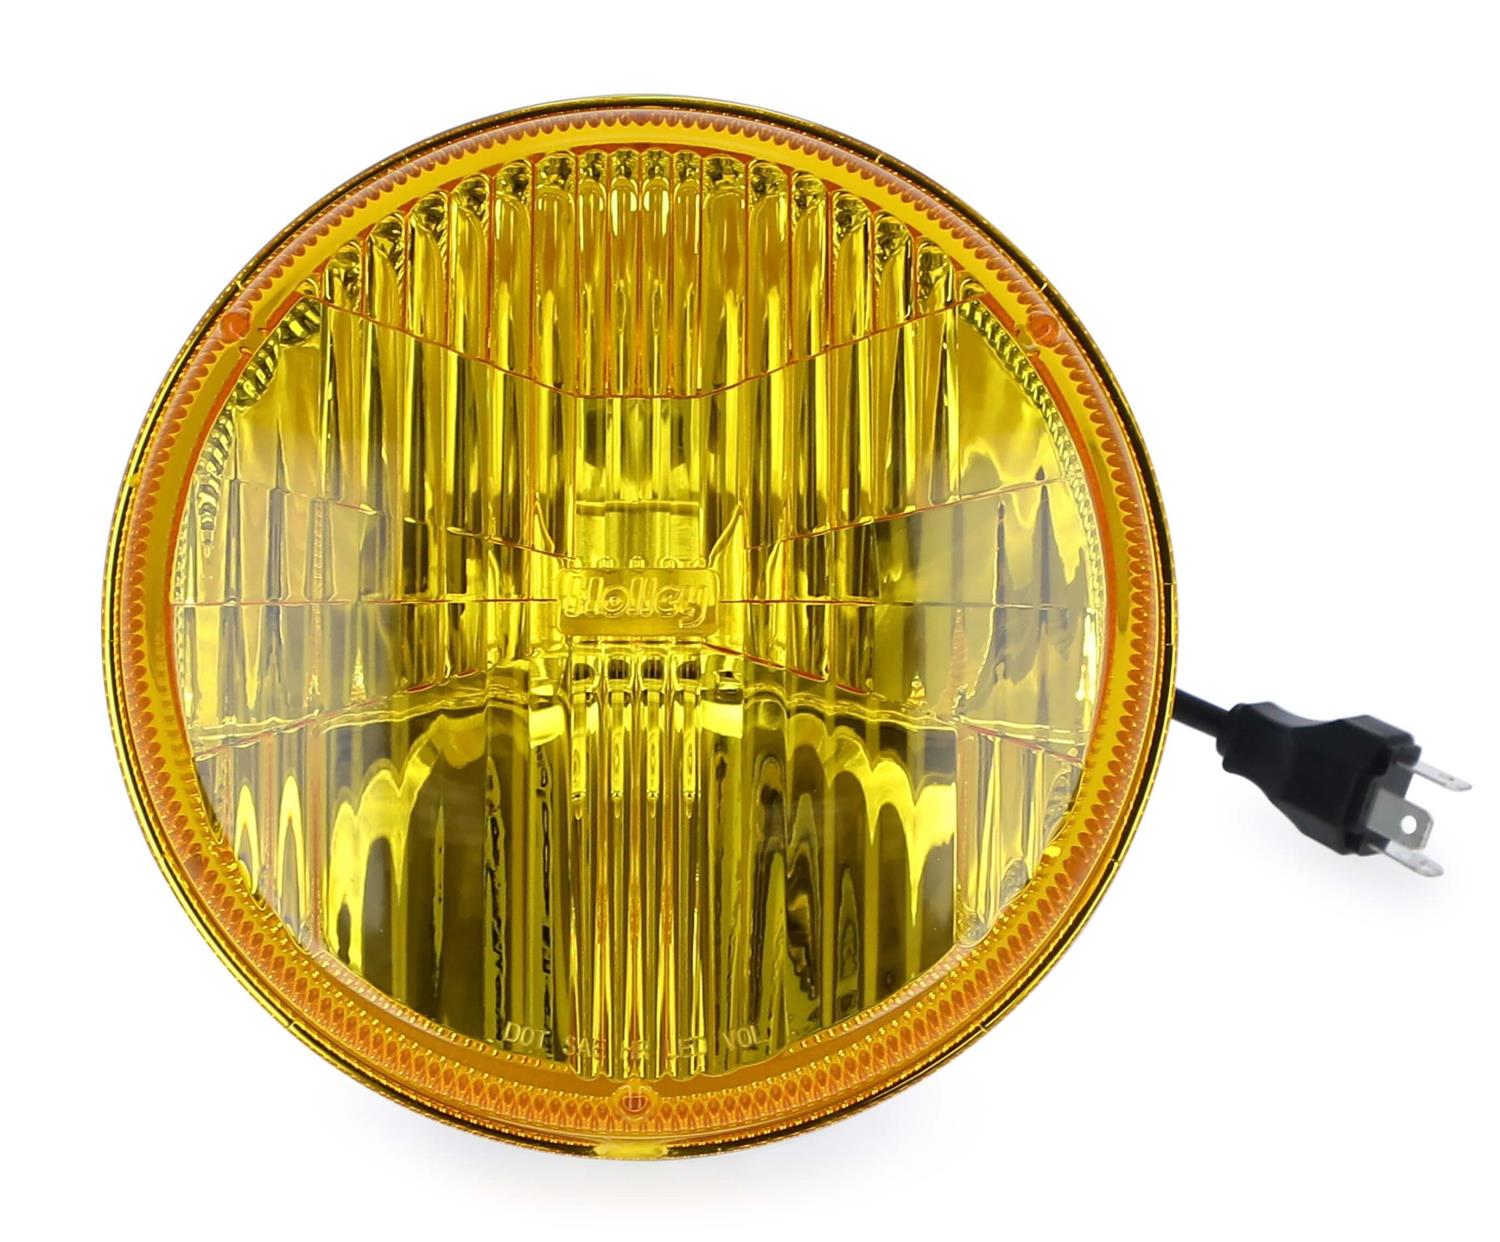 LFRB115 RetroBright LED 7 in. Round Headlight for Select 1930-2006 Vehicles with Round Headlight Grille [Yellow]